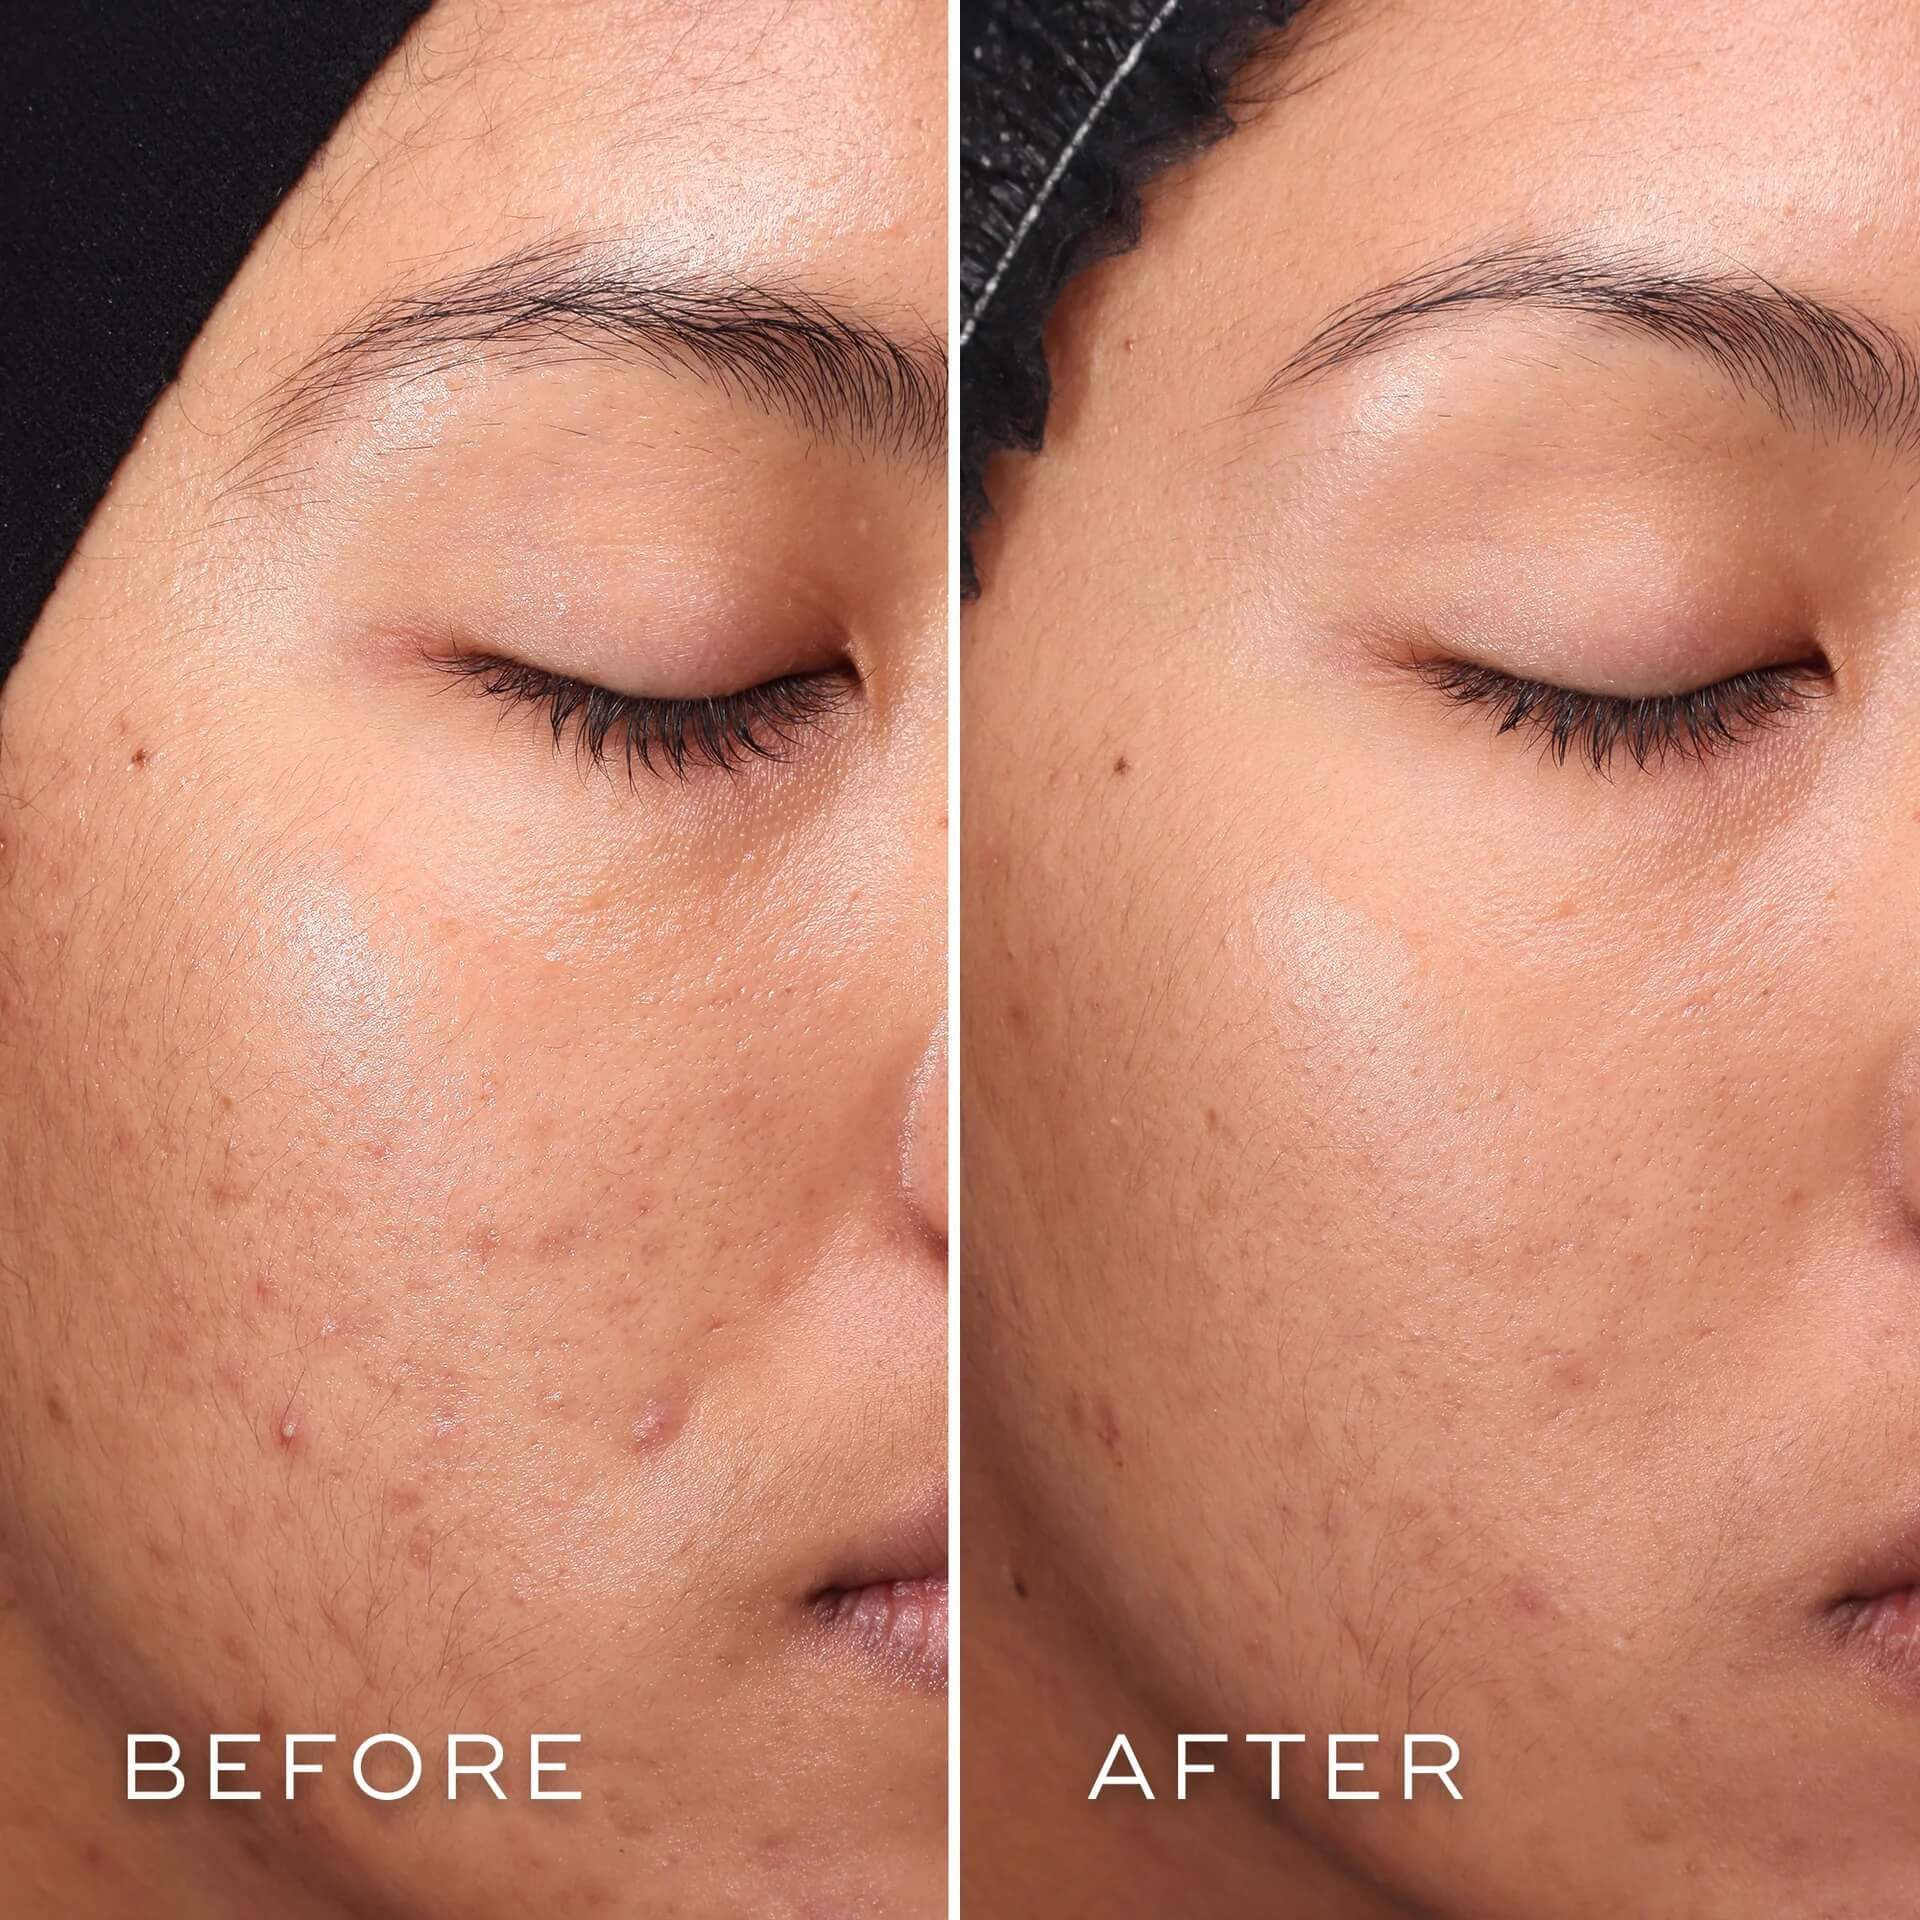 medik8 press & clear before and after image